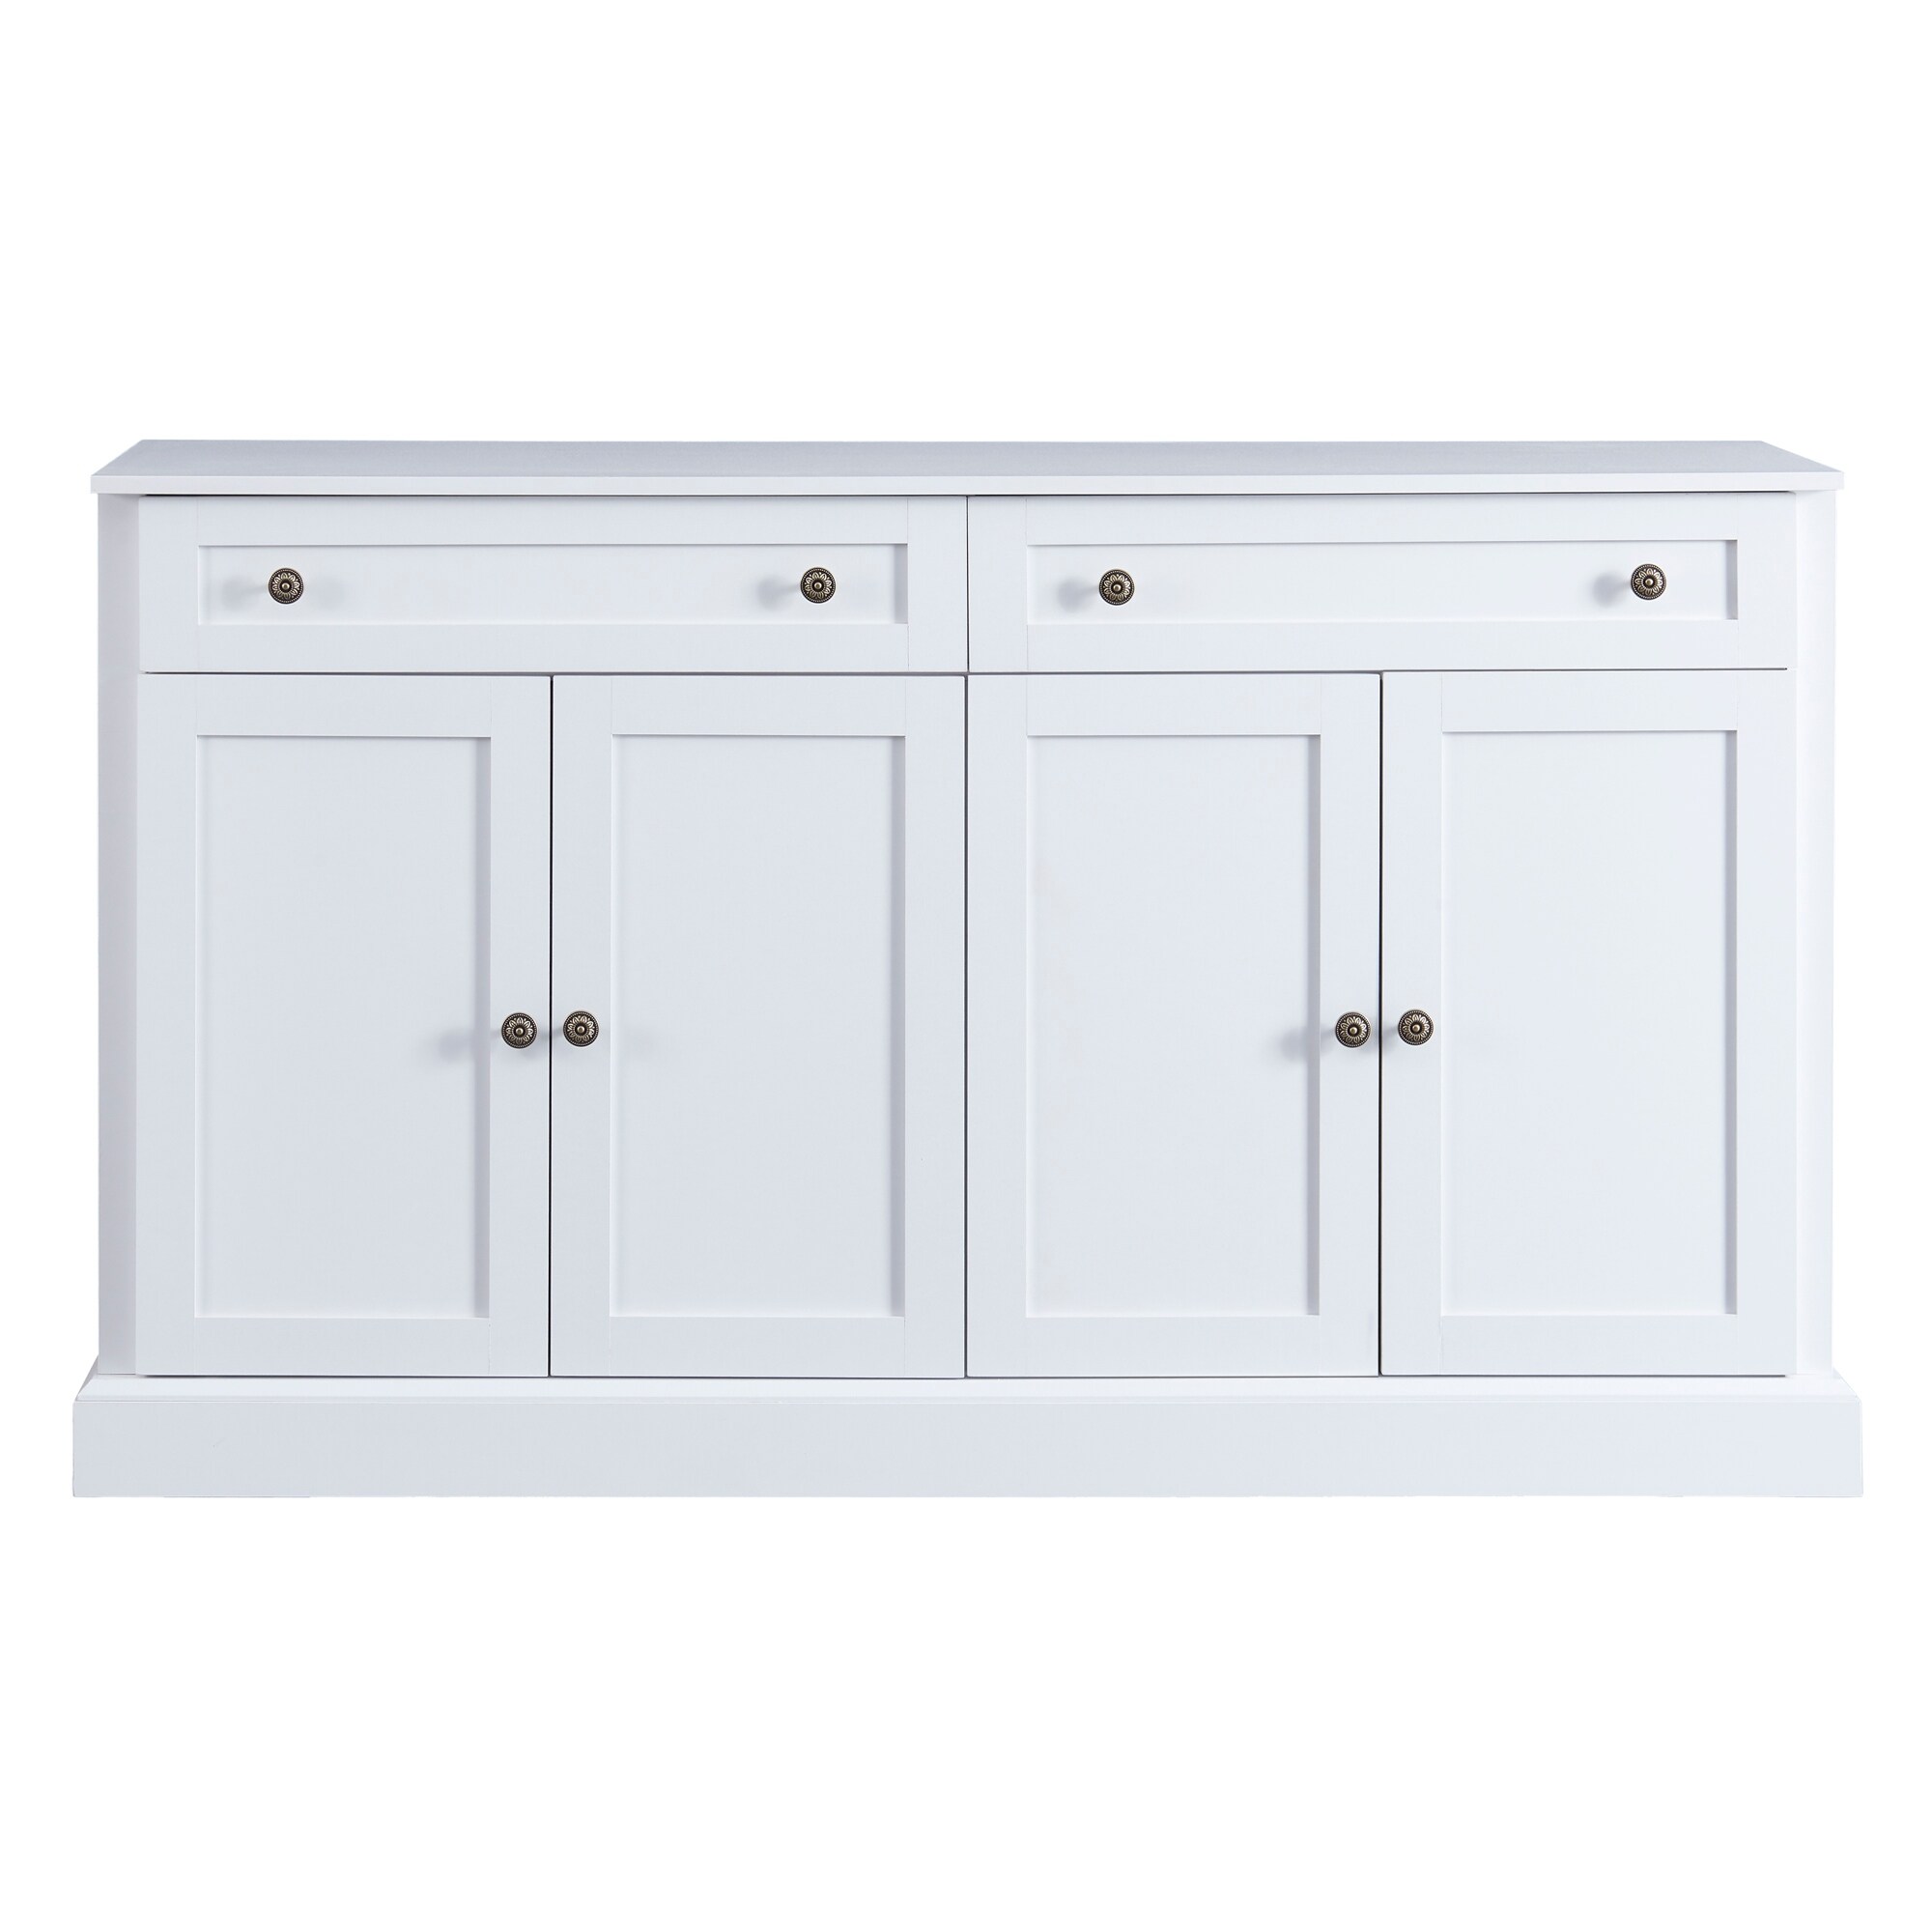 Kitchen Sideboard Storage Buffet Cabinet with 2 Drawers & 4 Doors Adjustable Shelves for Dining Room, Living Room